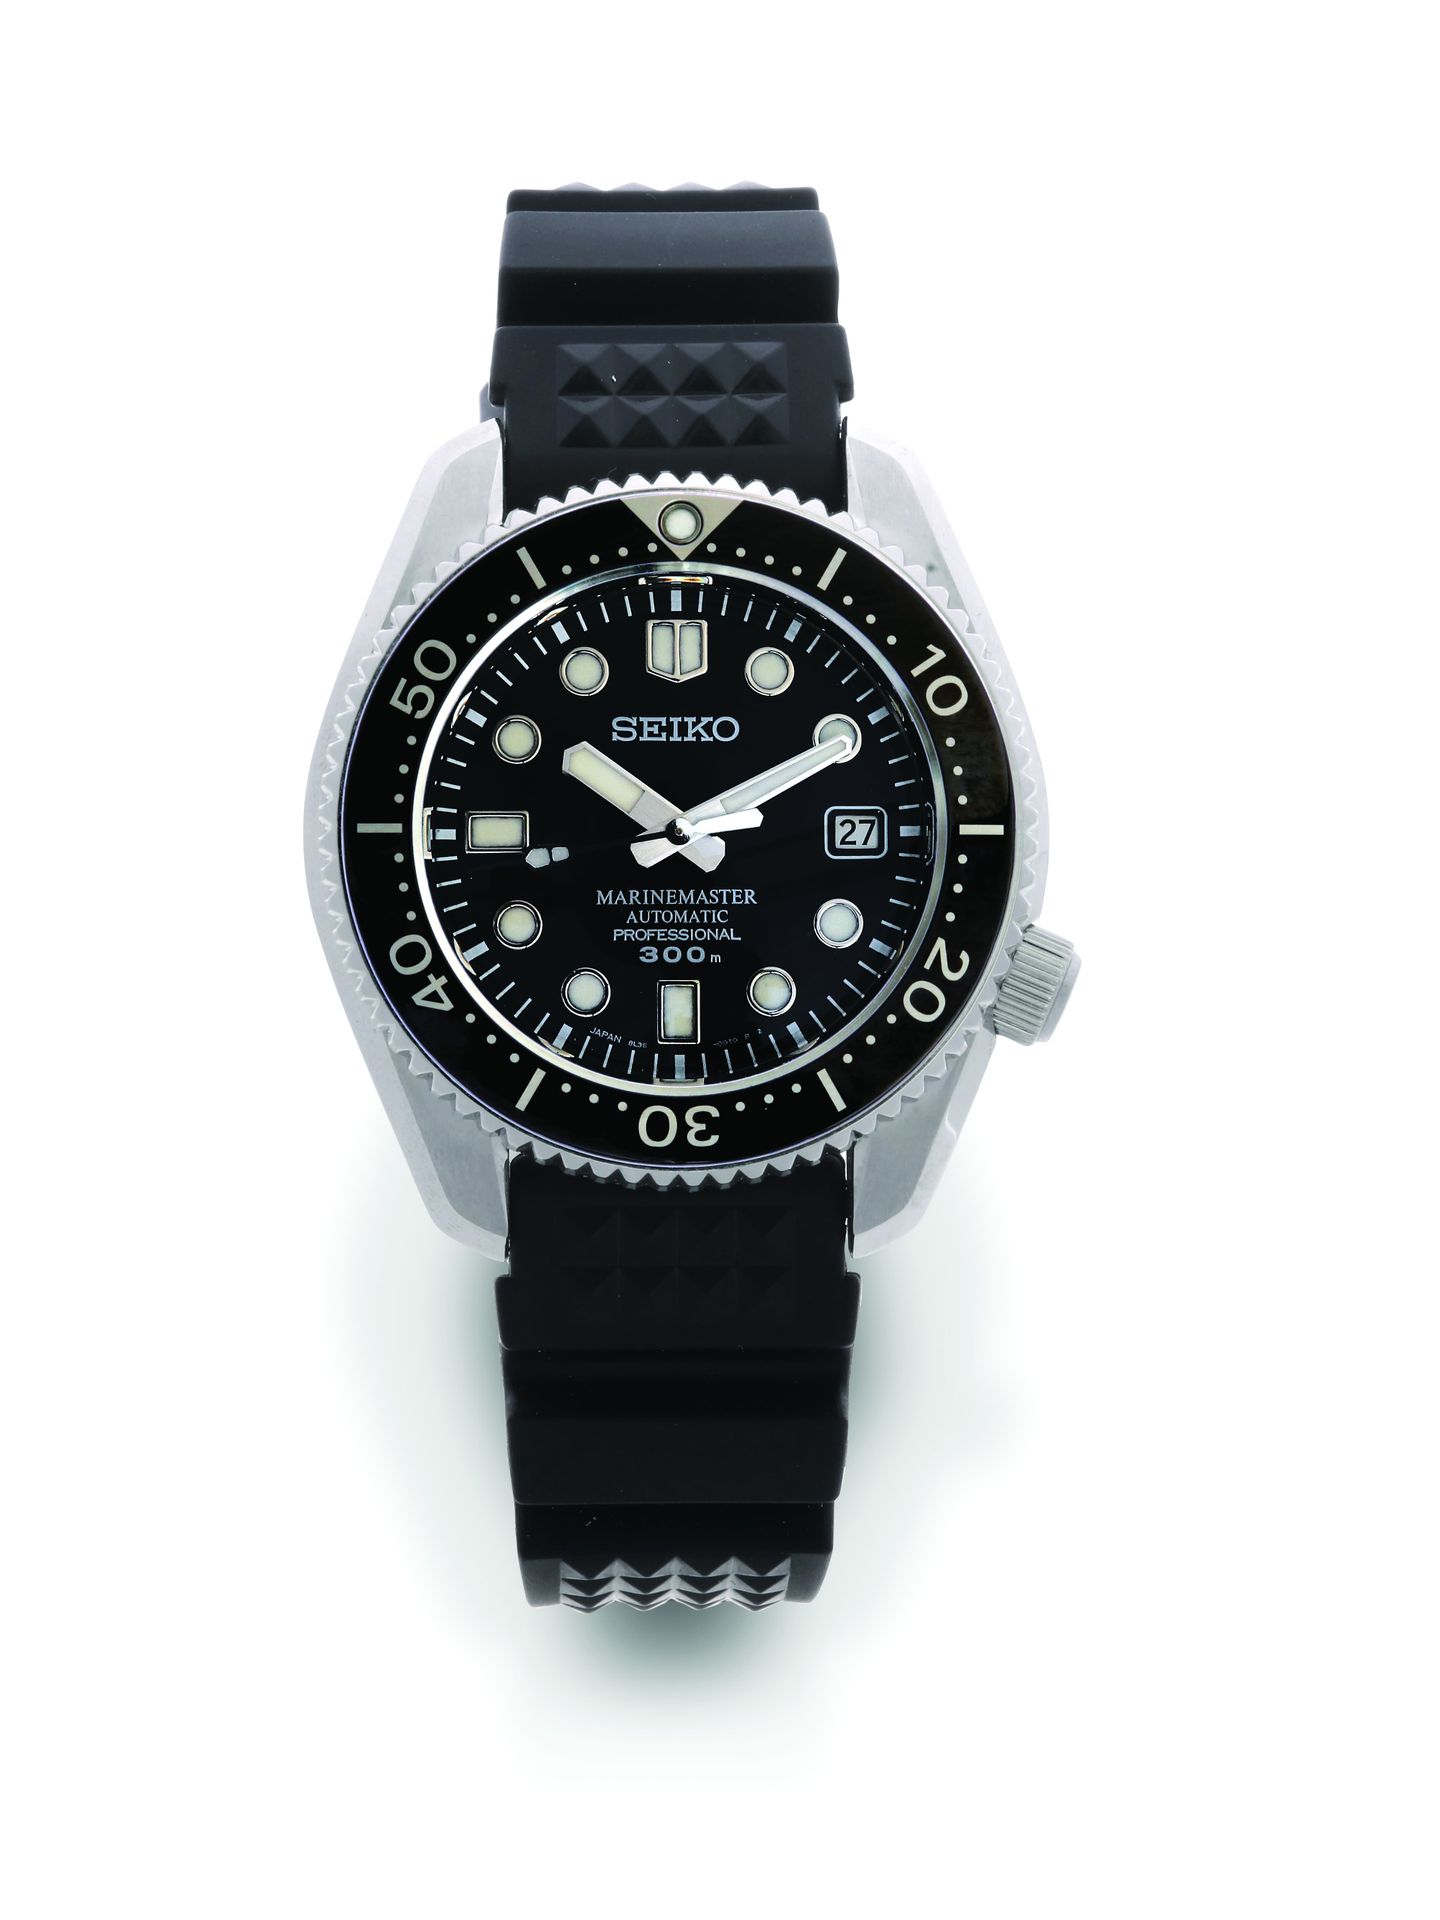 SEIKO Marinemaster 300 m
Reference 8L35 - 0010
Steel diver's watch with automati&hellip;